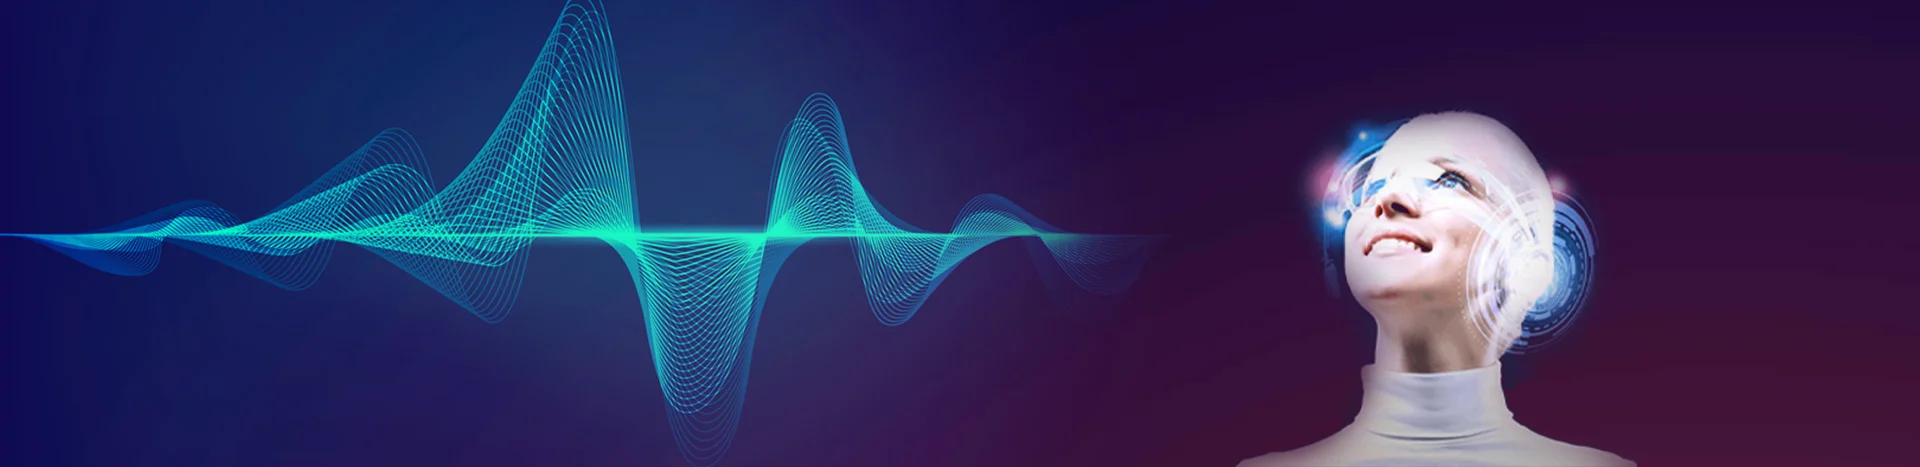 Voice User Interfaces